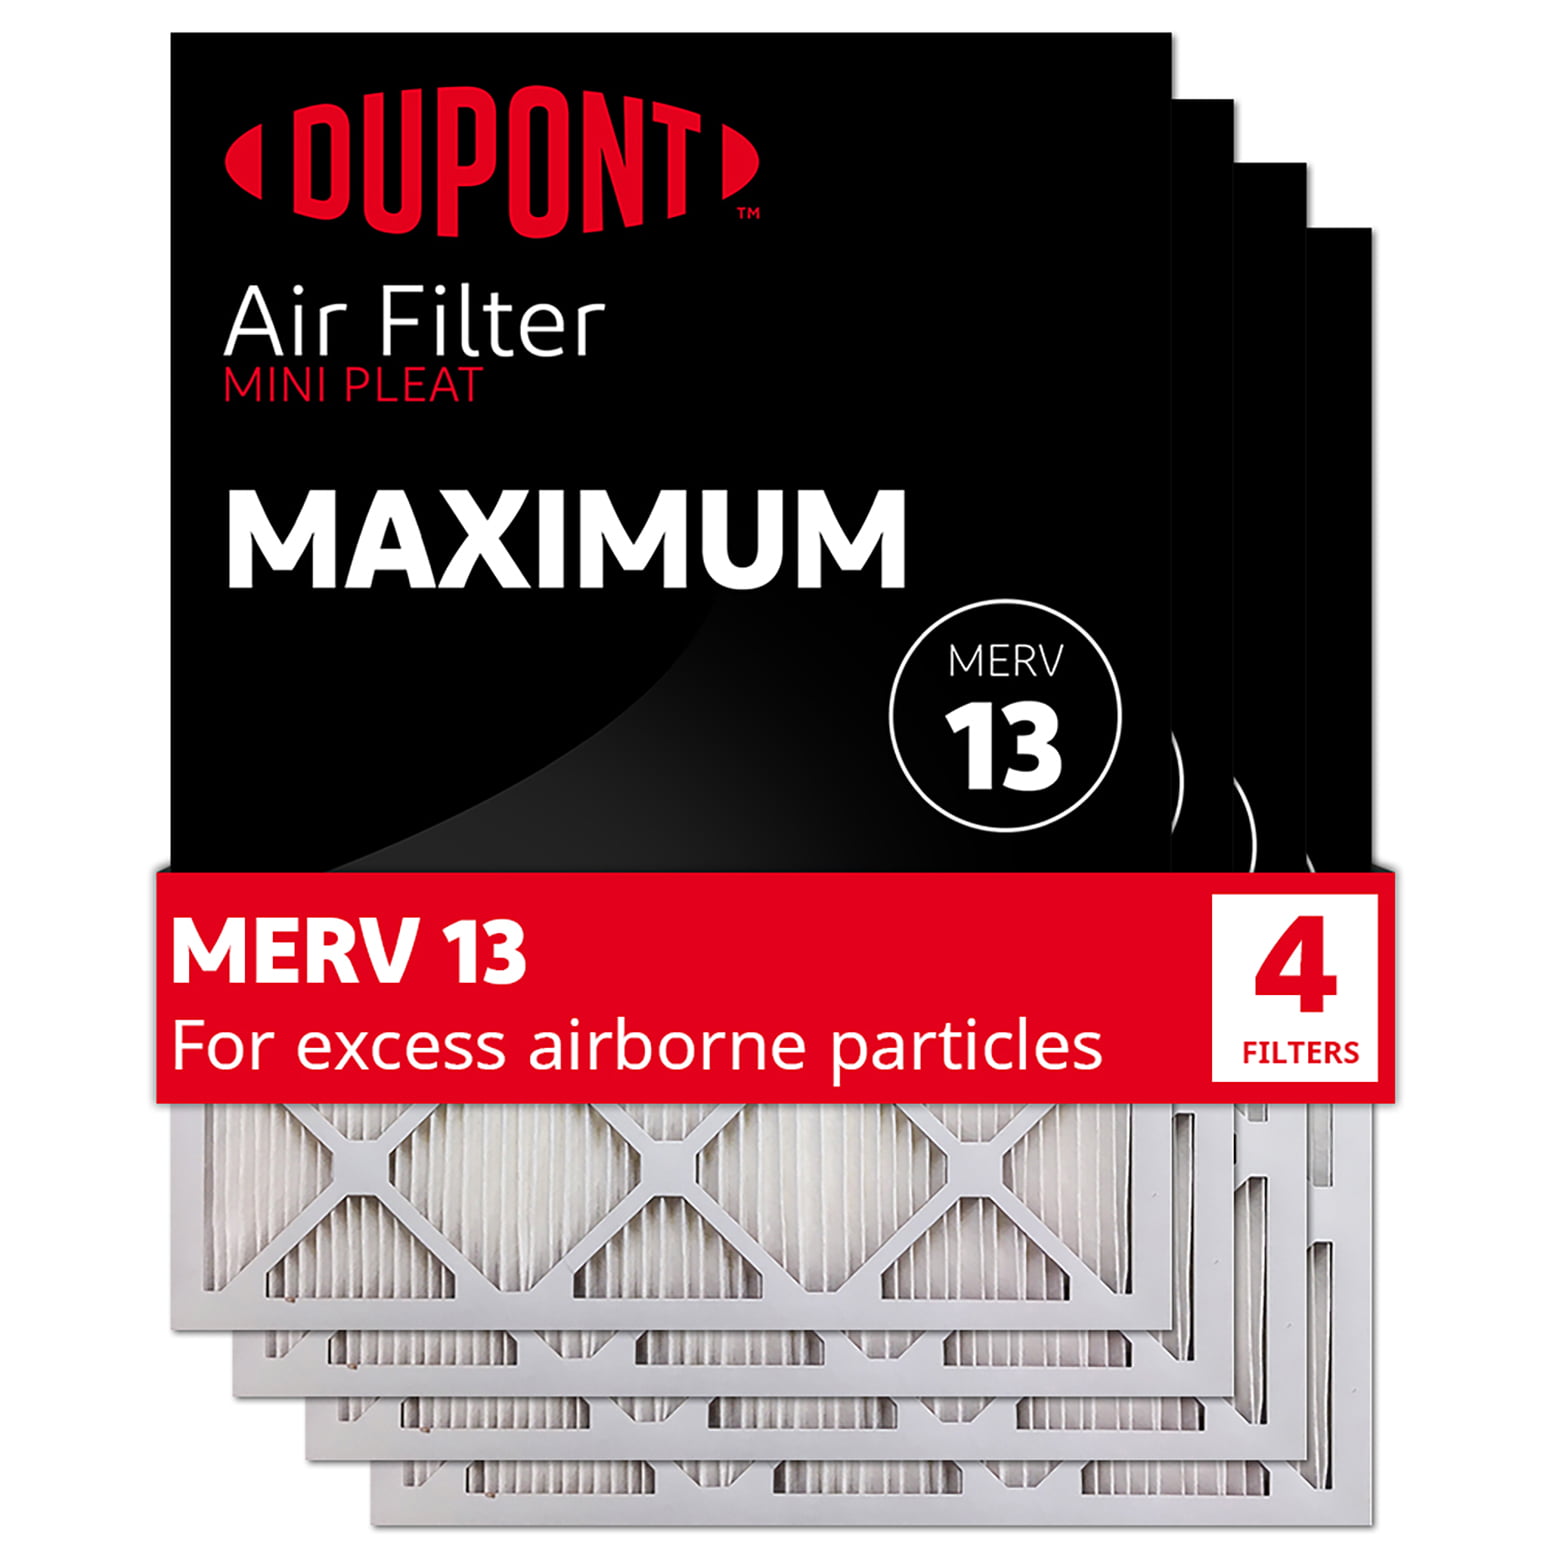 16x24x1 DuPont Family Care Pollen & Allergen MERV 8 Air Filters Case of 12